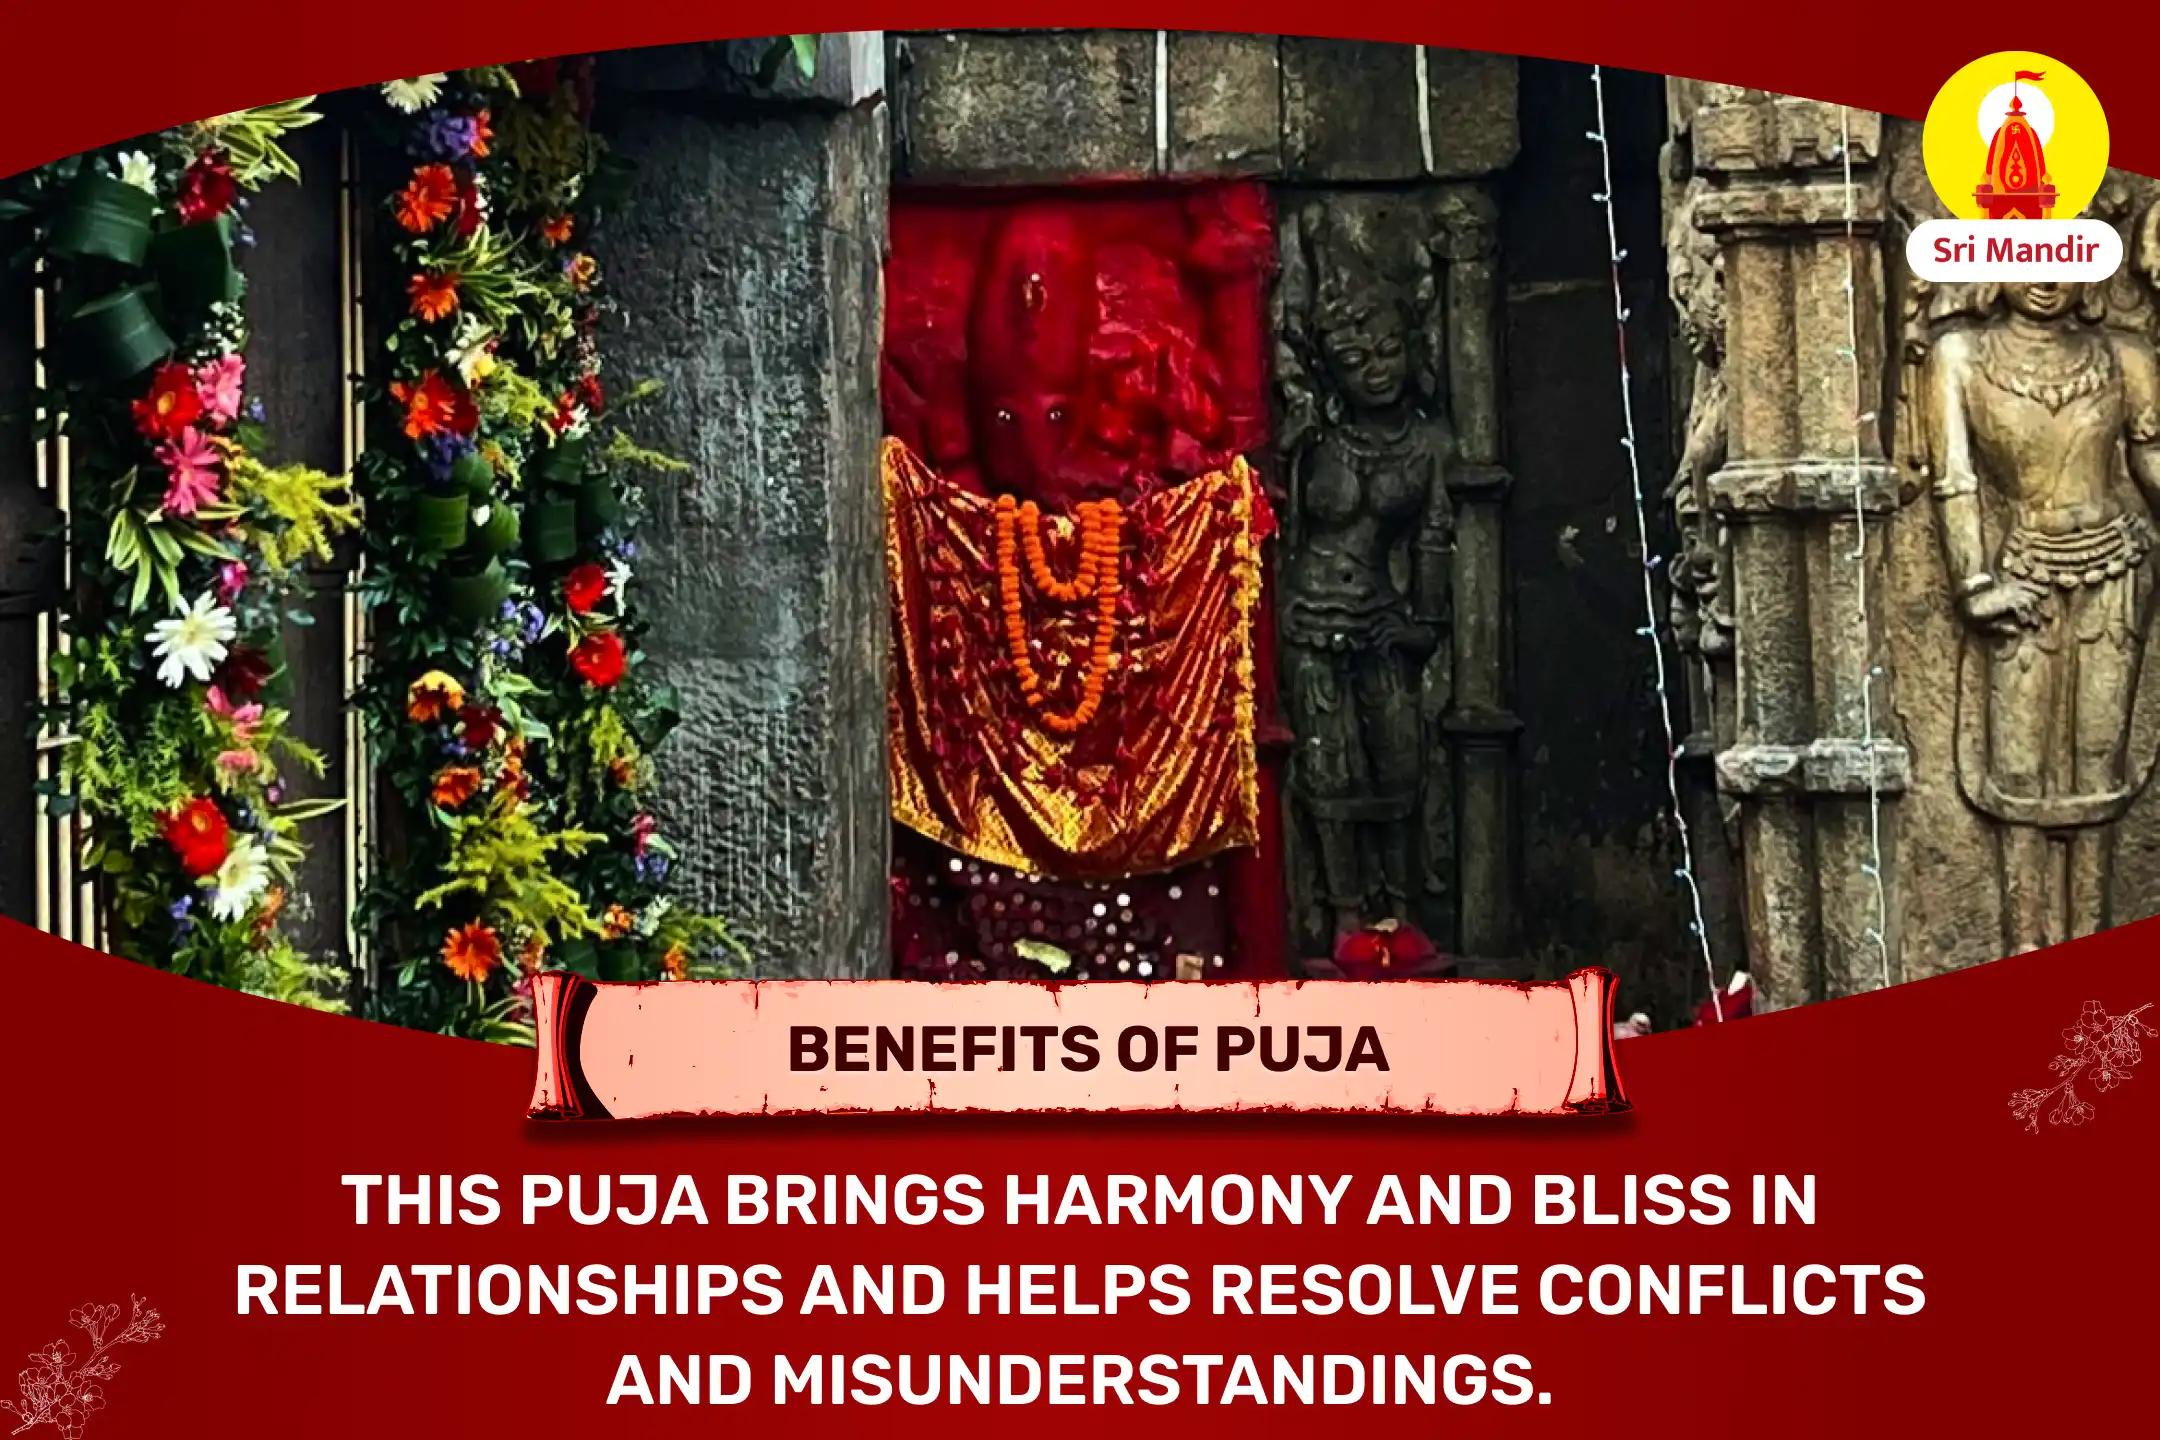 Maa Kamakhya Tantrokta Maha Yagya To Achieve Bliss in Relationship and Resolve Conflicts